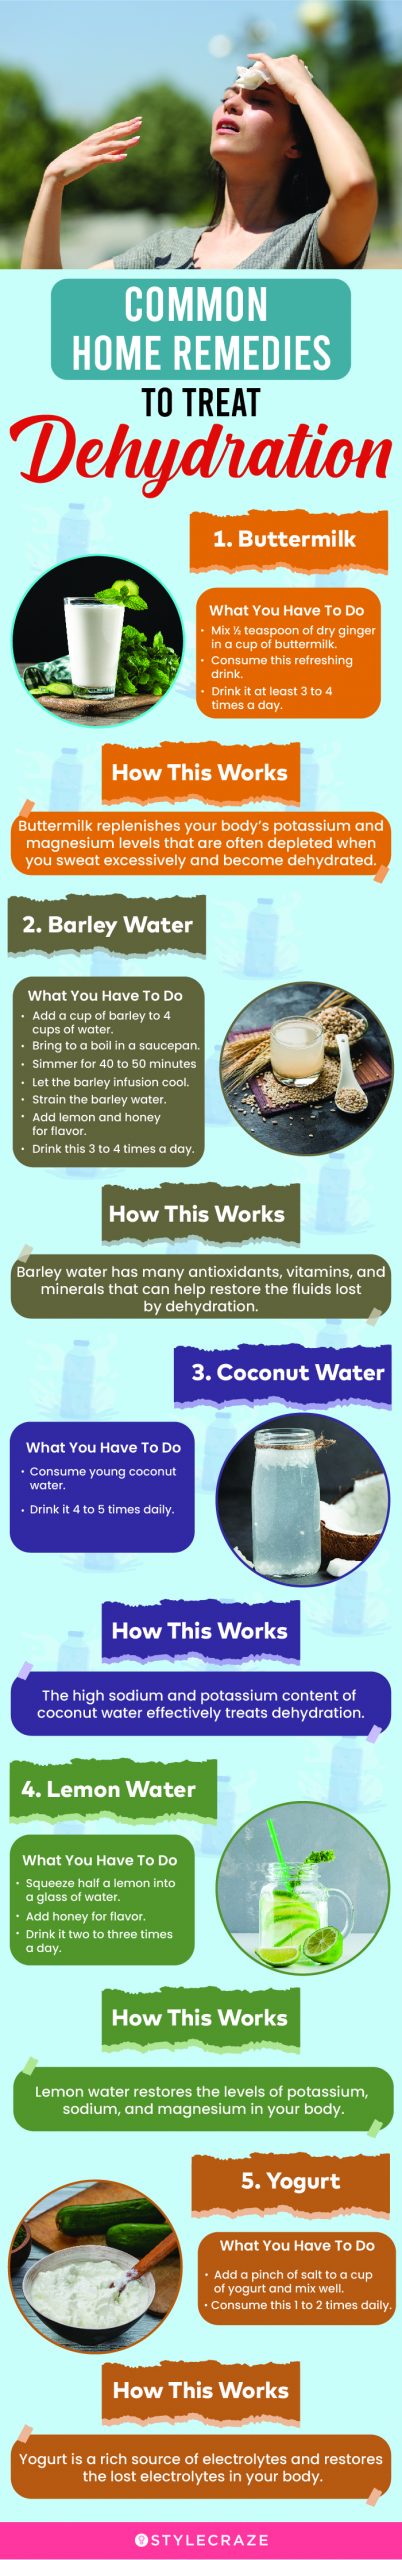 common home remedies to treat dehydration (infographic)